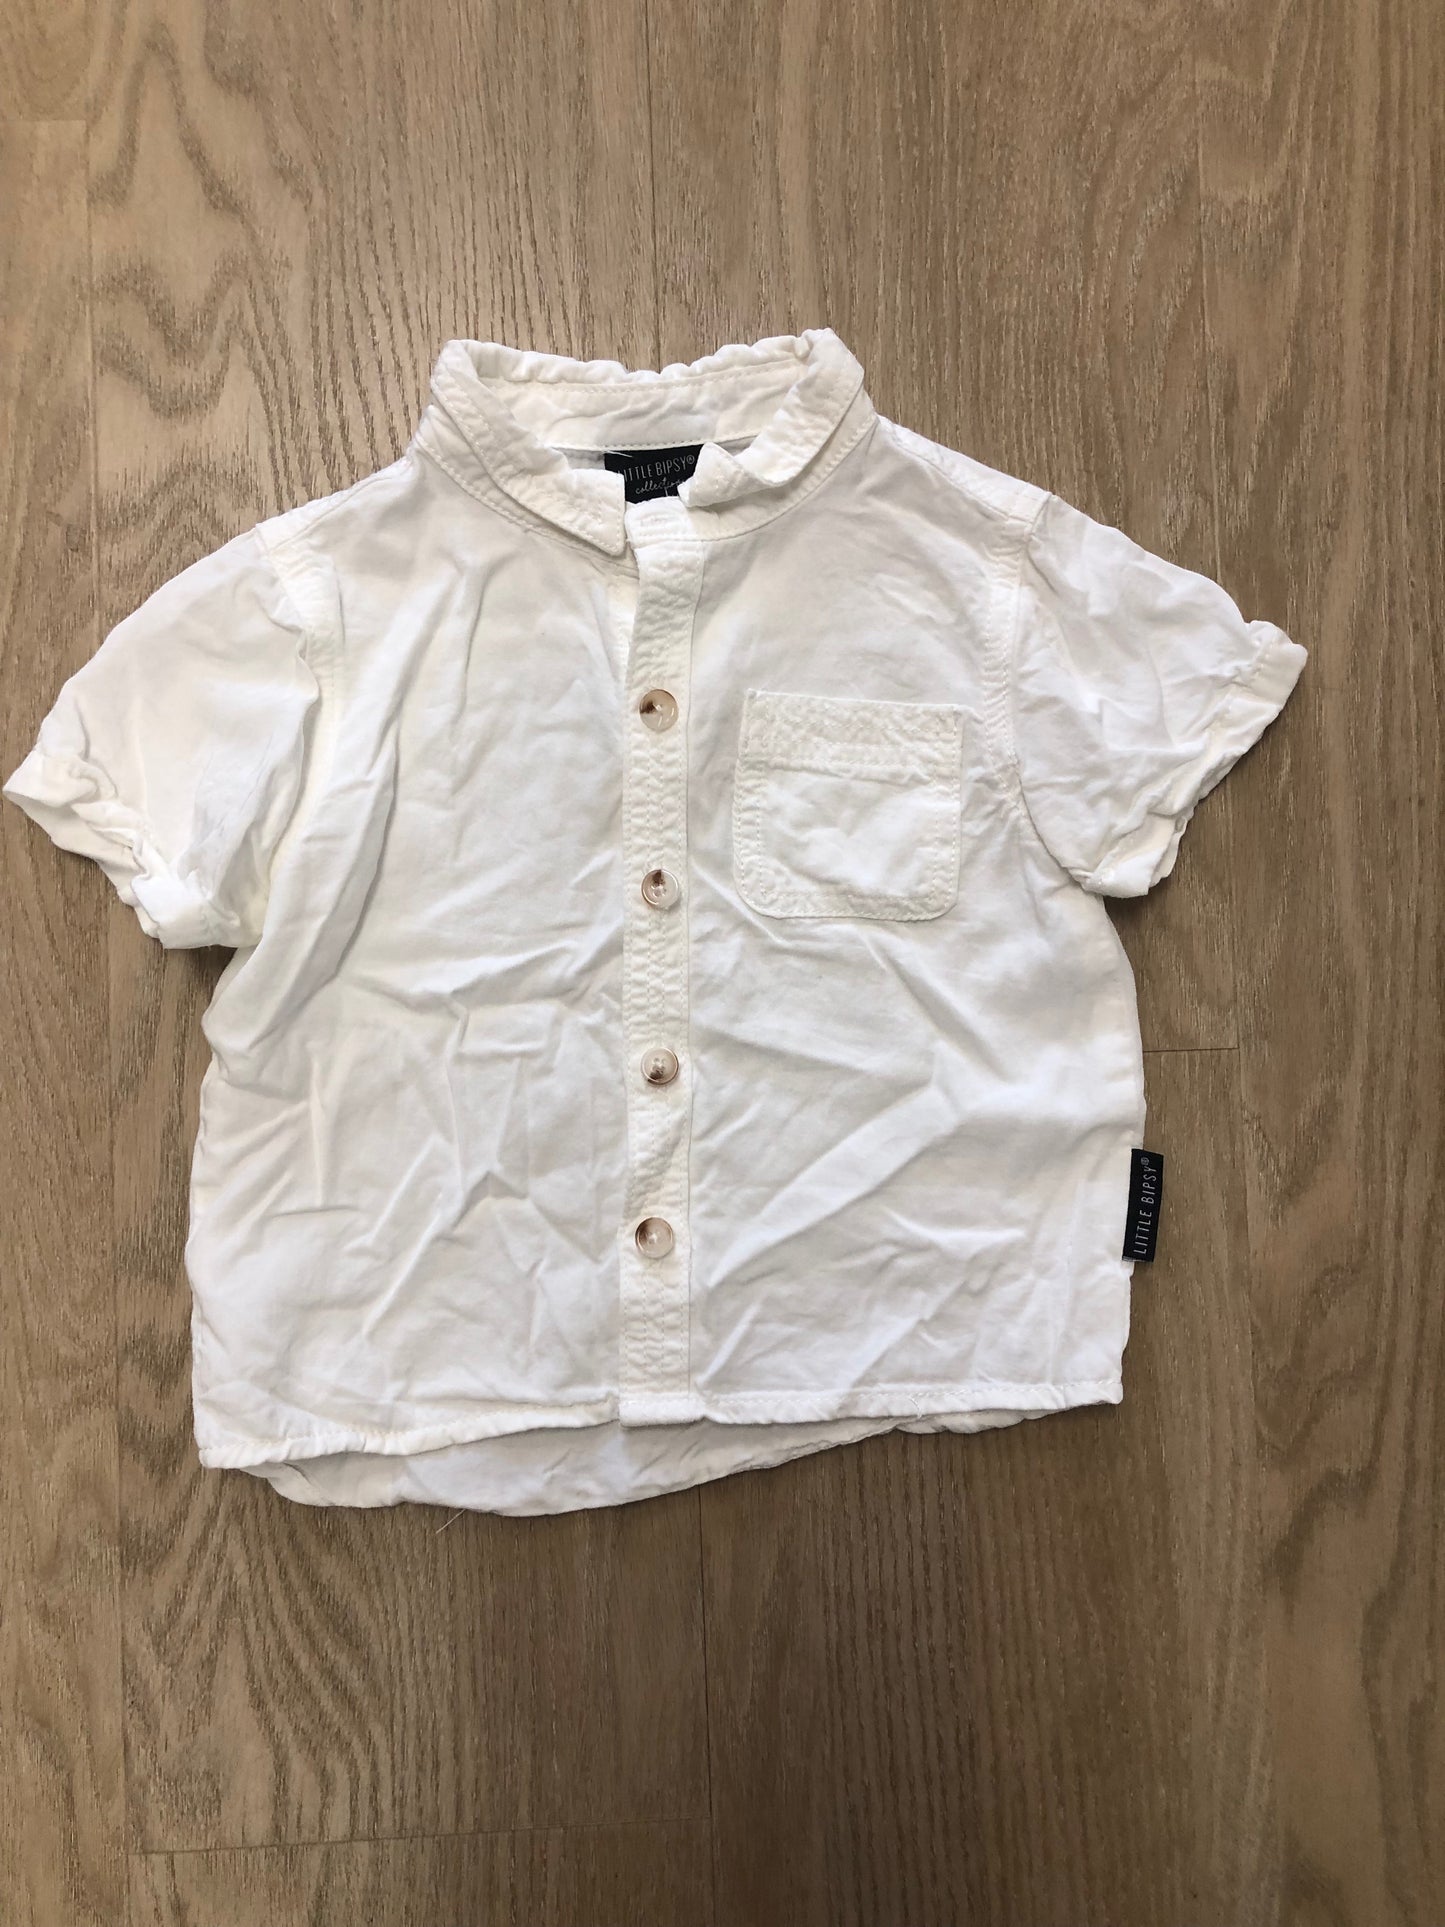 Little Bipsy Child Size 18 Months White button up Shirt